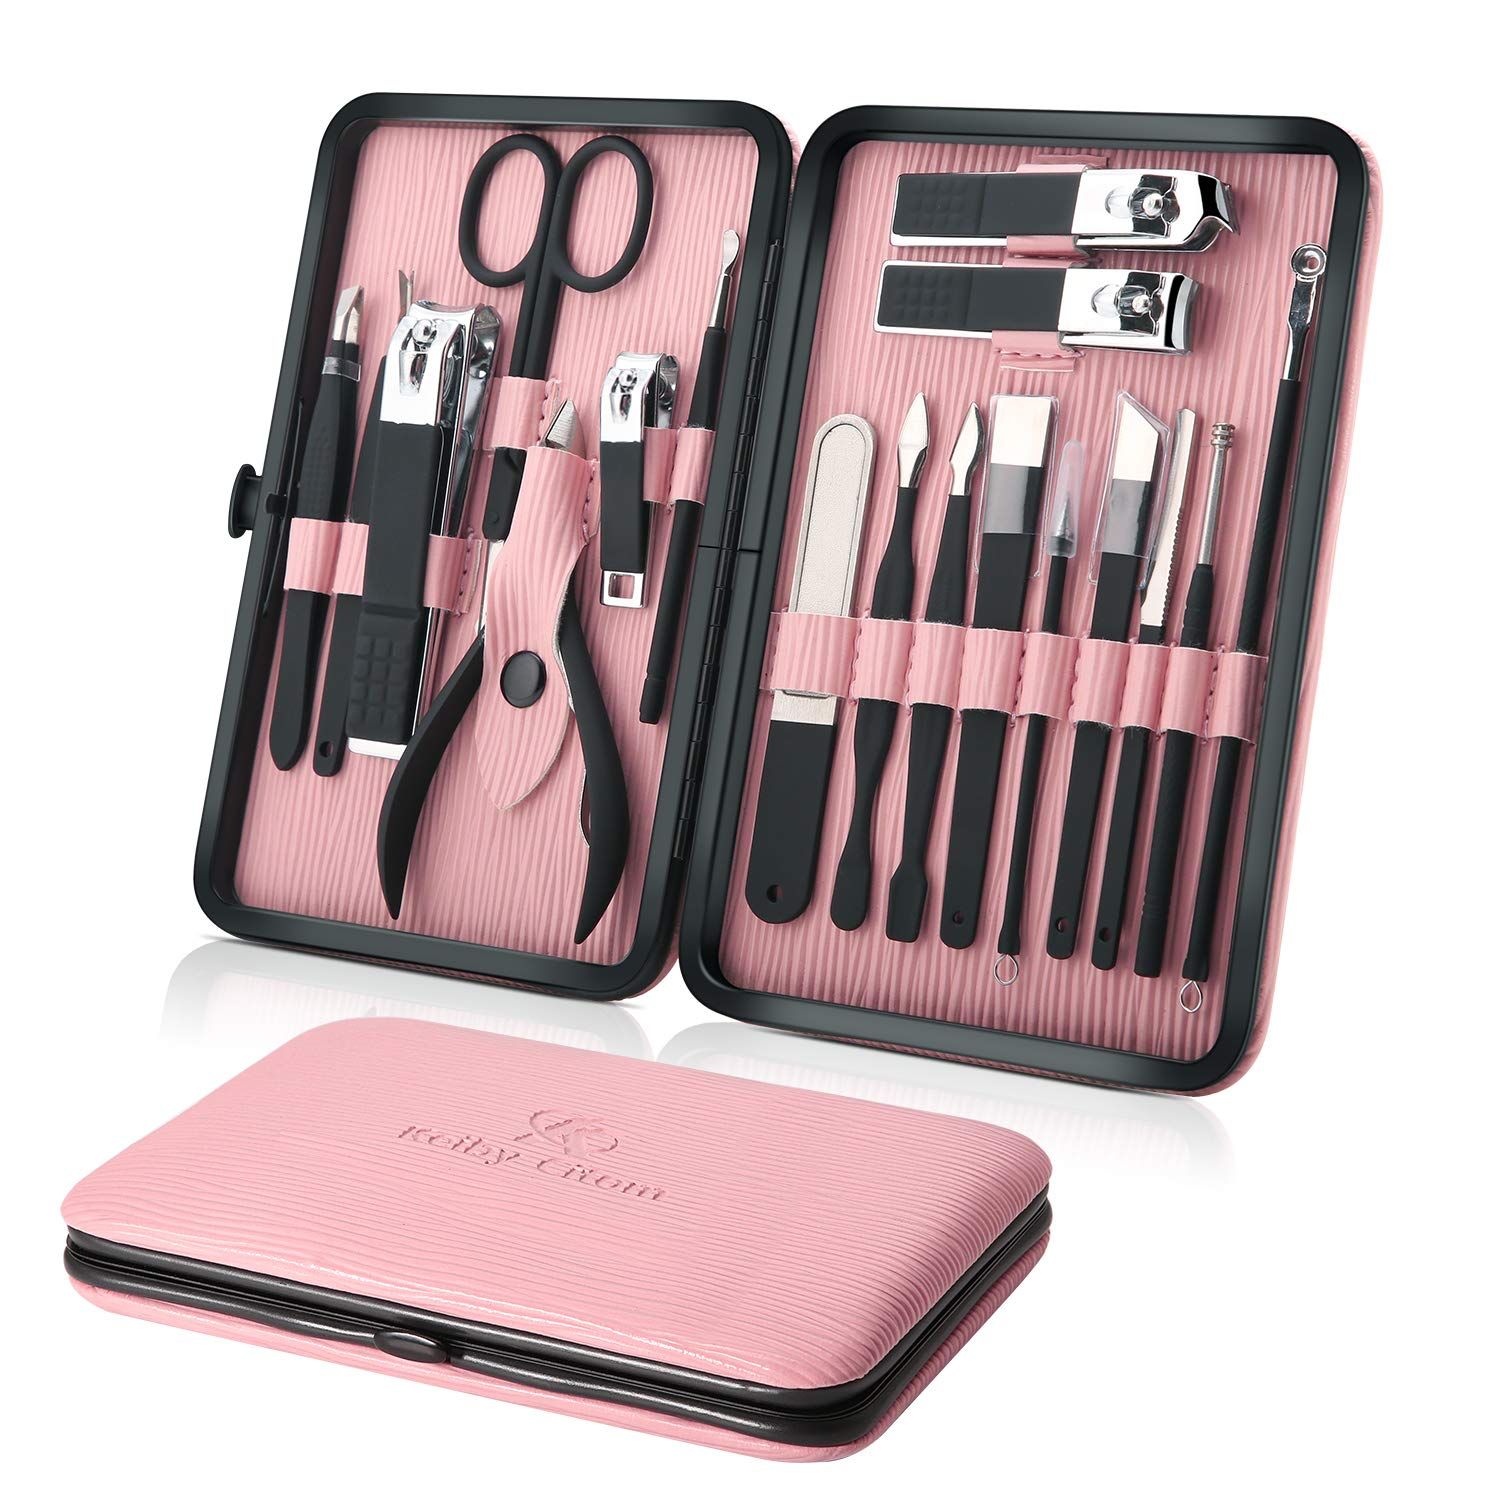 Manicure Set Professional Nail Clippers Kit Pedicure Care Tools- Stainless Steel Women Grooming Kit 18Pcs for Travel or Home (Pink) | Amazon (US)